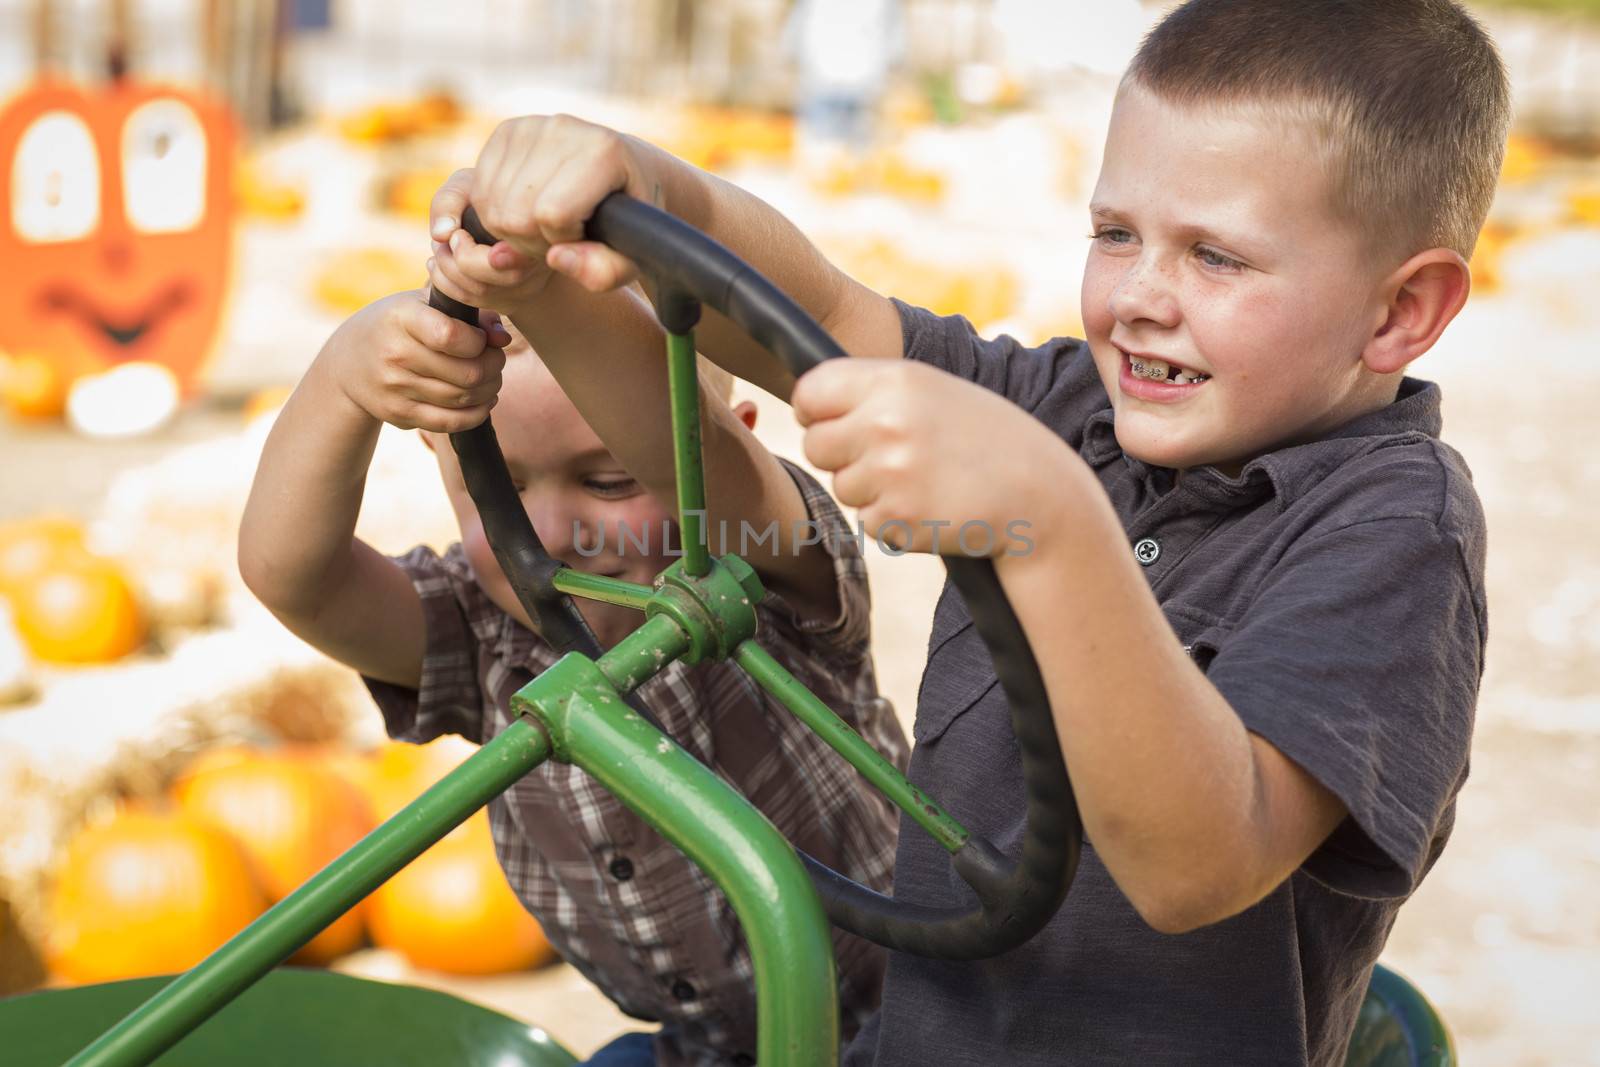 Adorable Young Boys Playing on an Old Tractor in a Rustic Outdoor Fall Setting.
